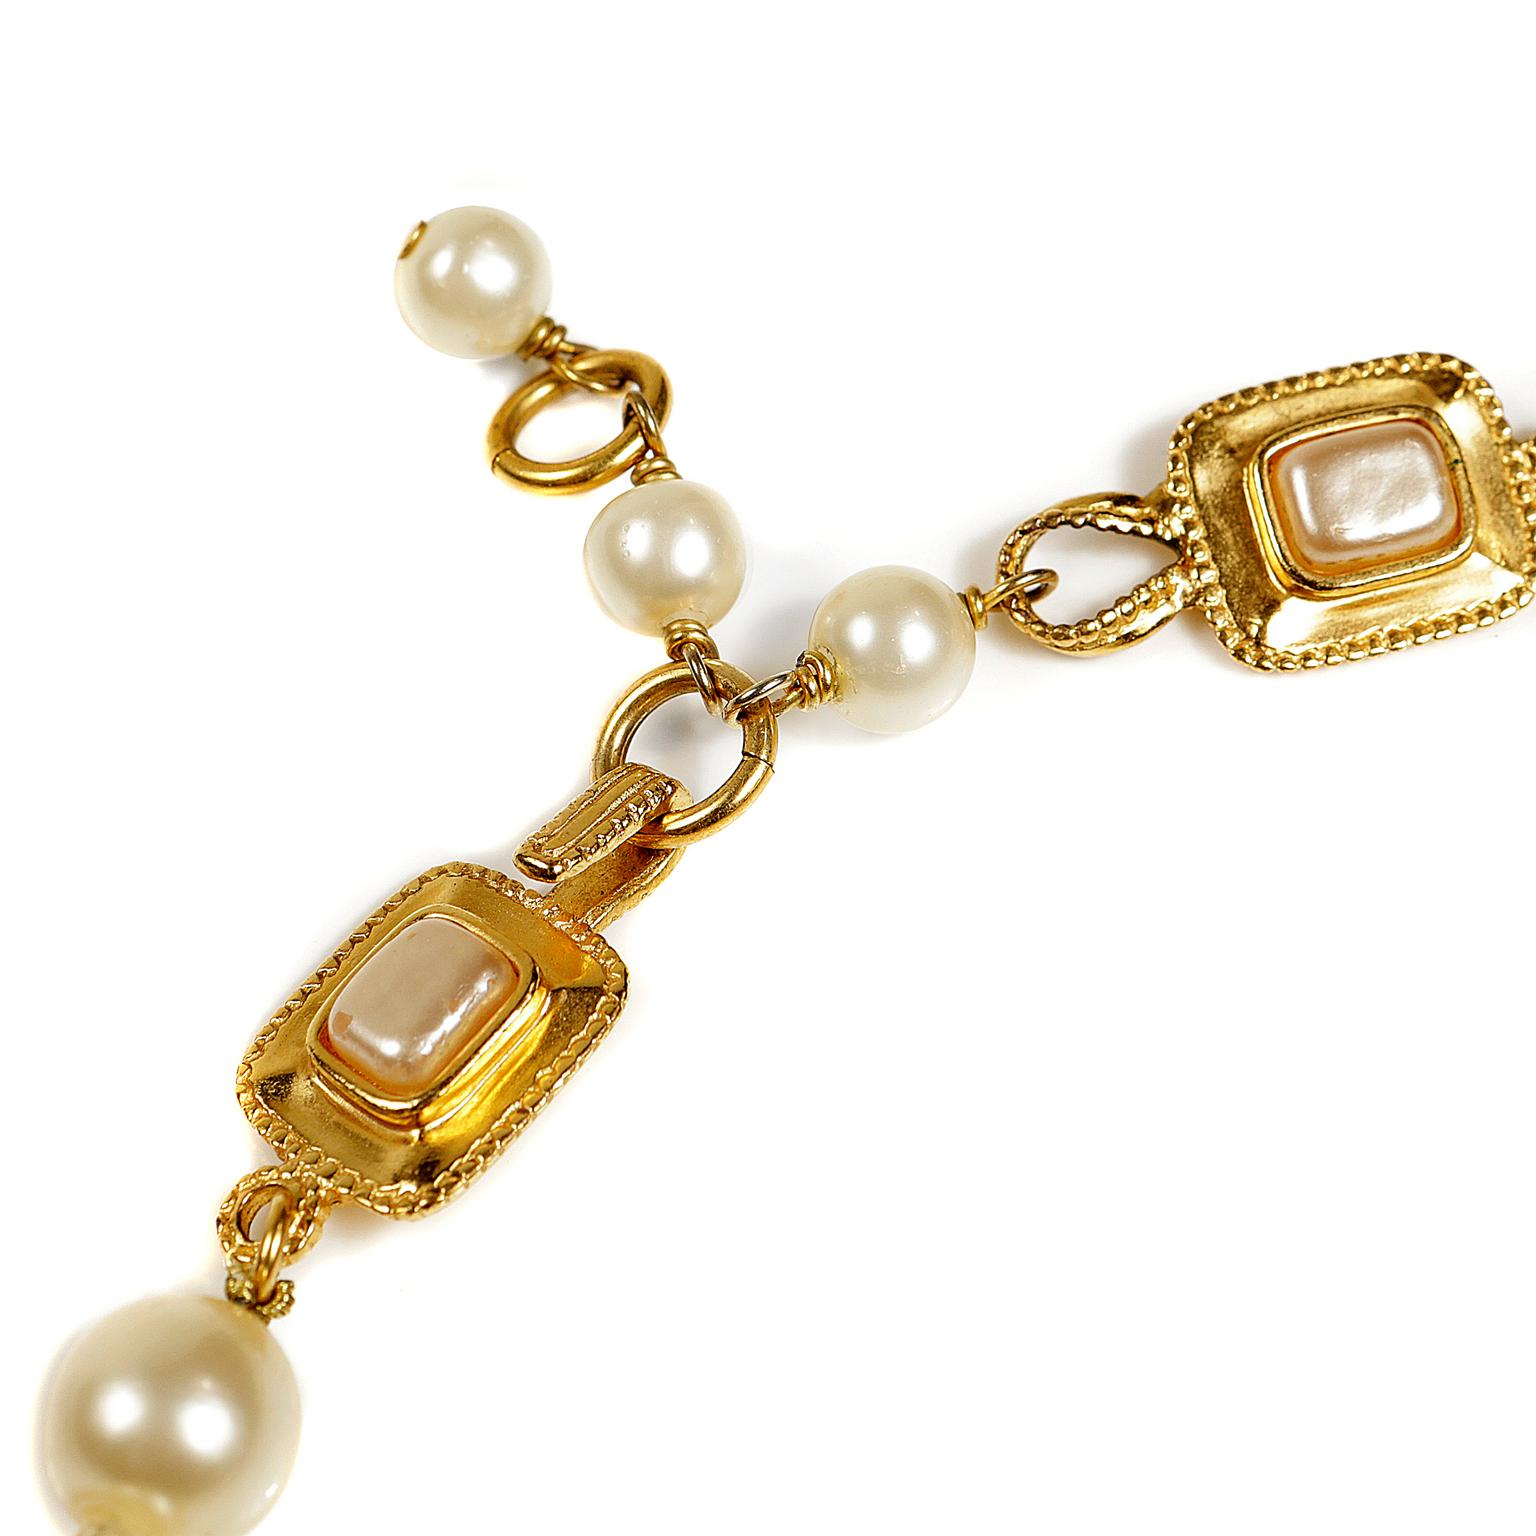 Chanel Gripoix and Pearl Medallion on Pearl Strand Necklace 2